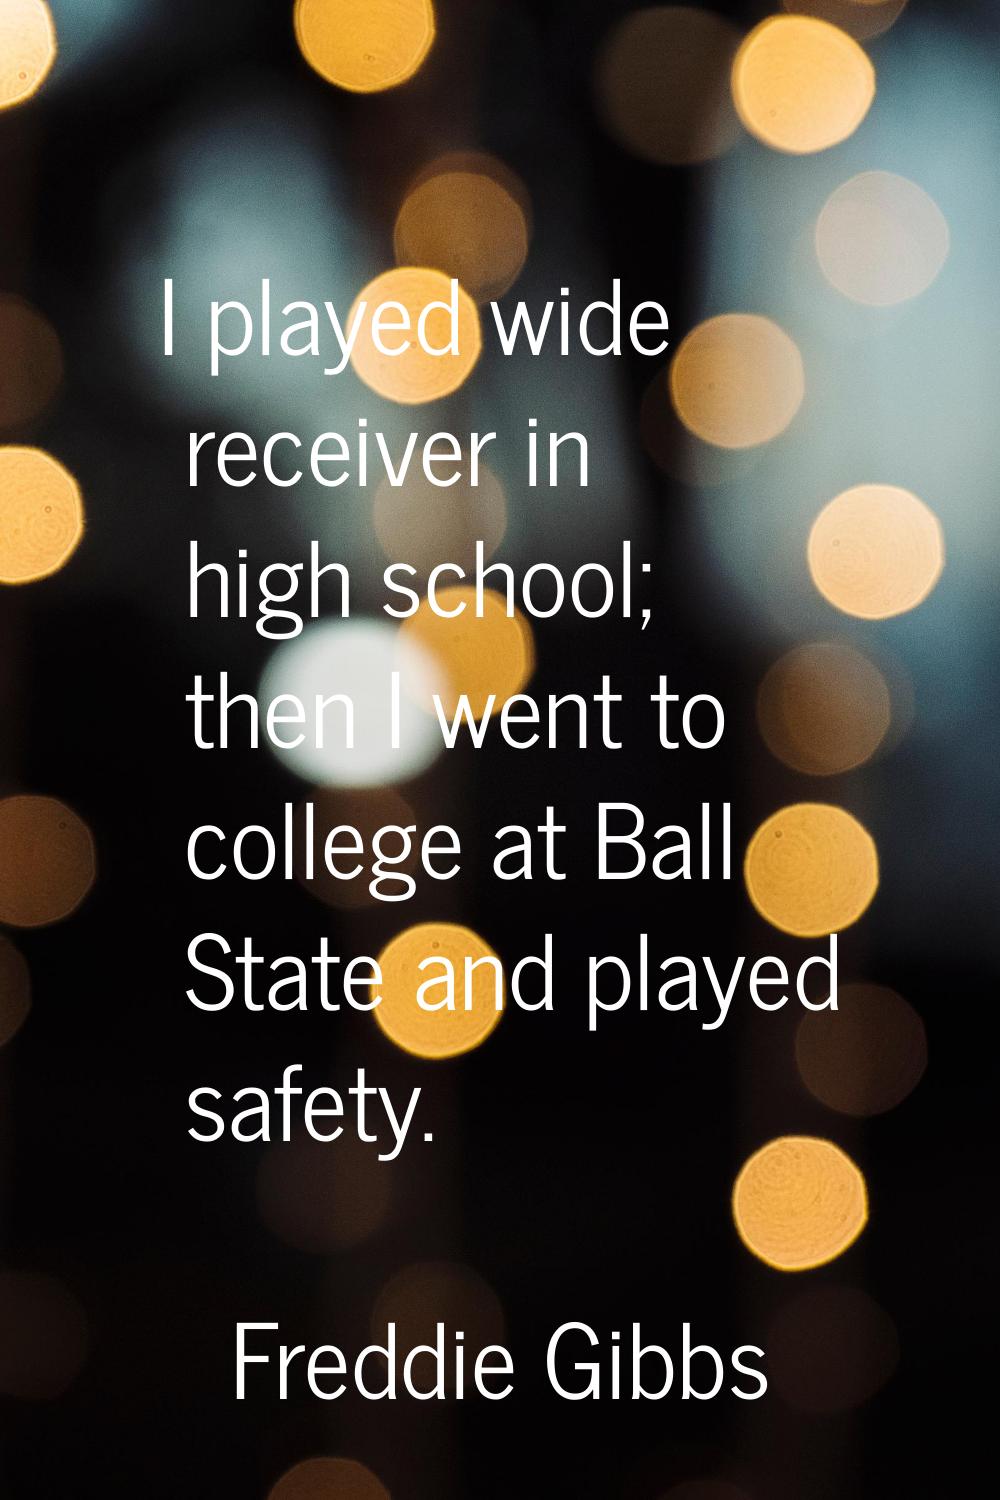 I played wide receiver in high school; then I went to college at Ball State and played safety.